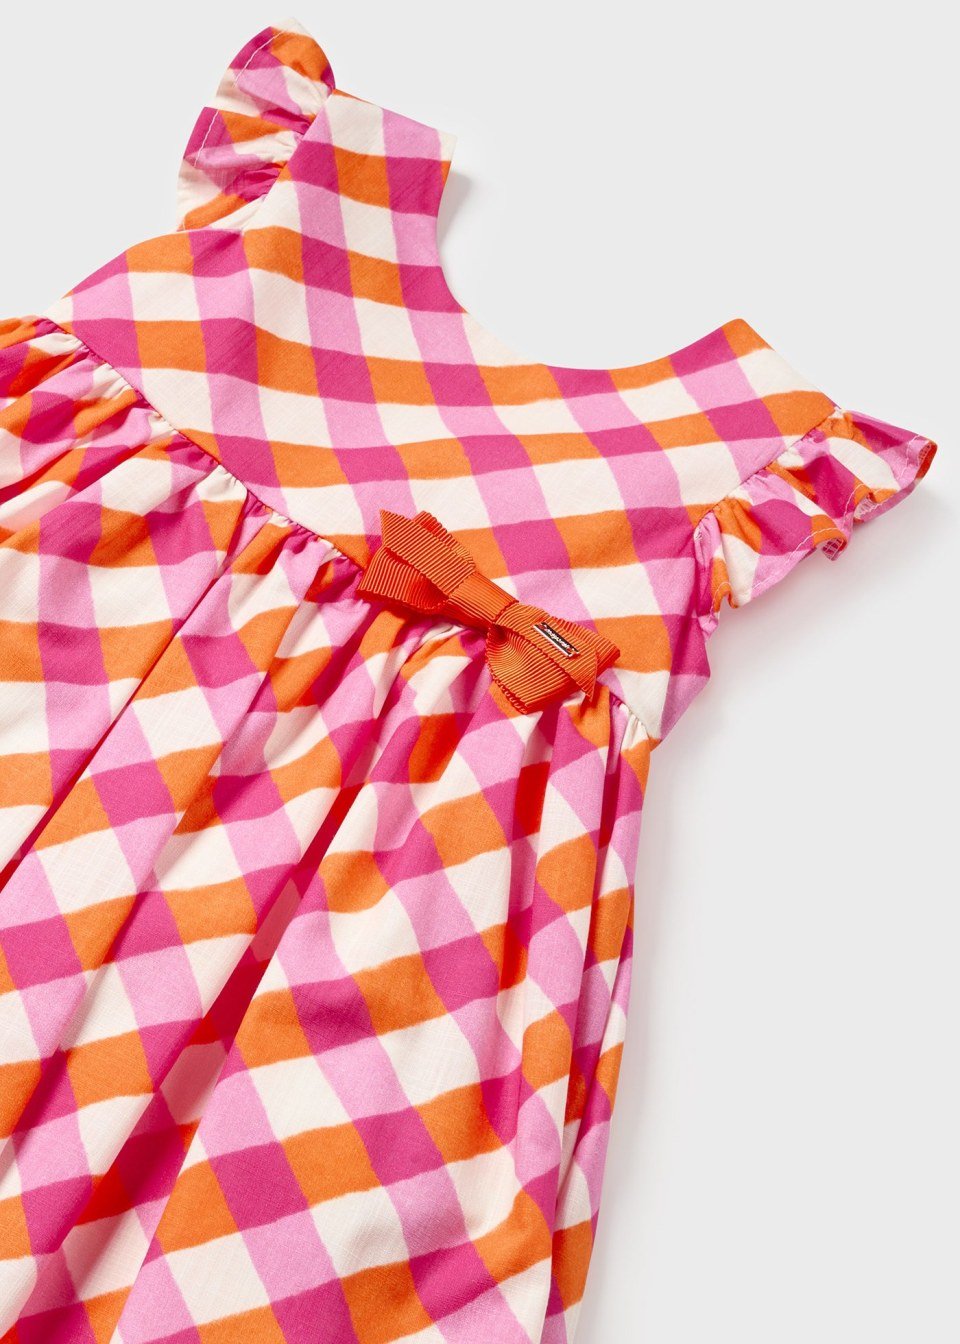 Girls' magenta/white/orange printed dress with delicate bow. - The Village Retail